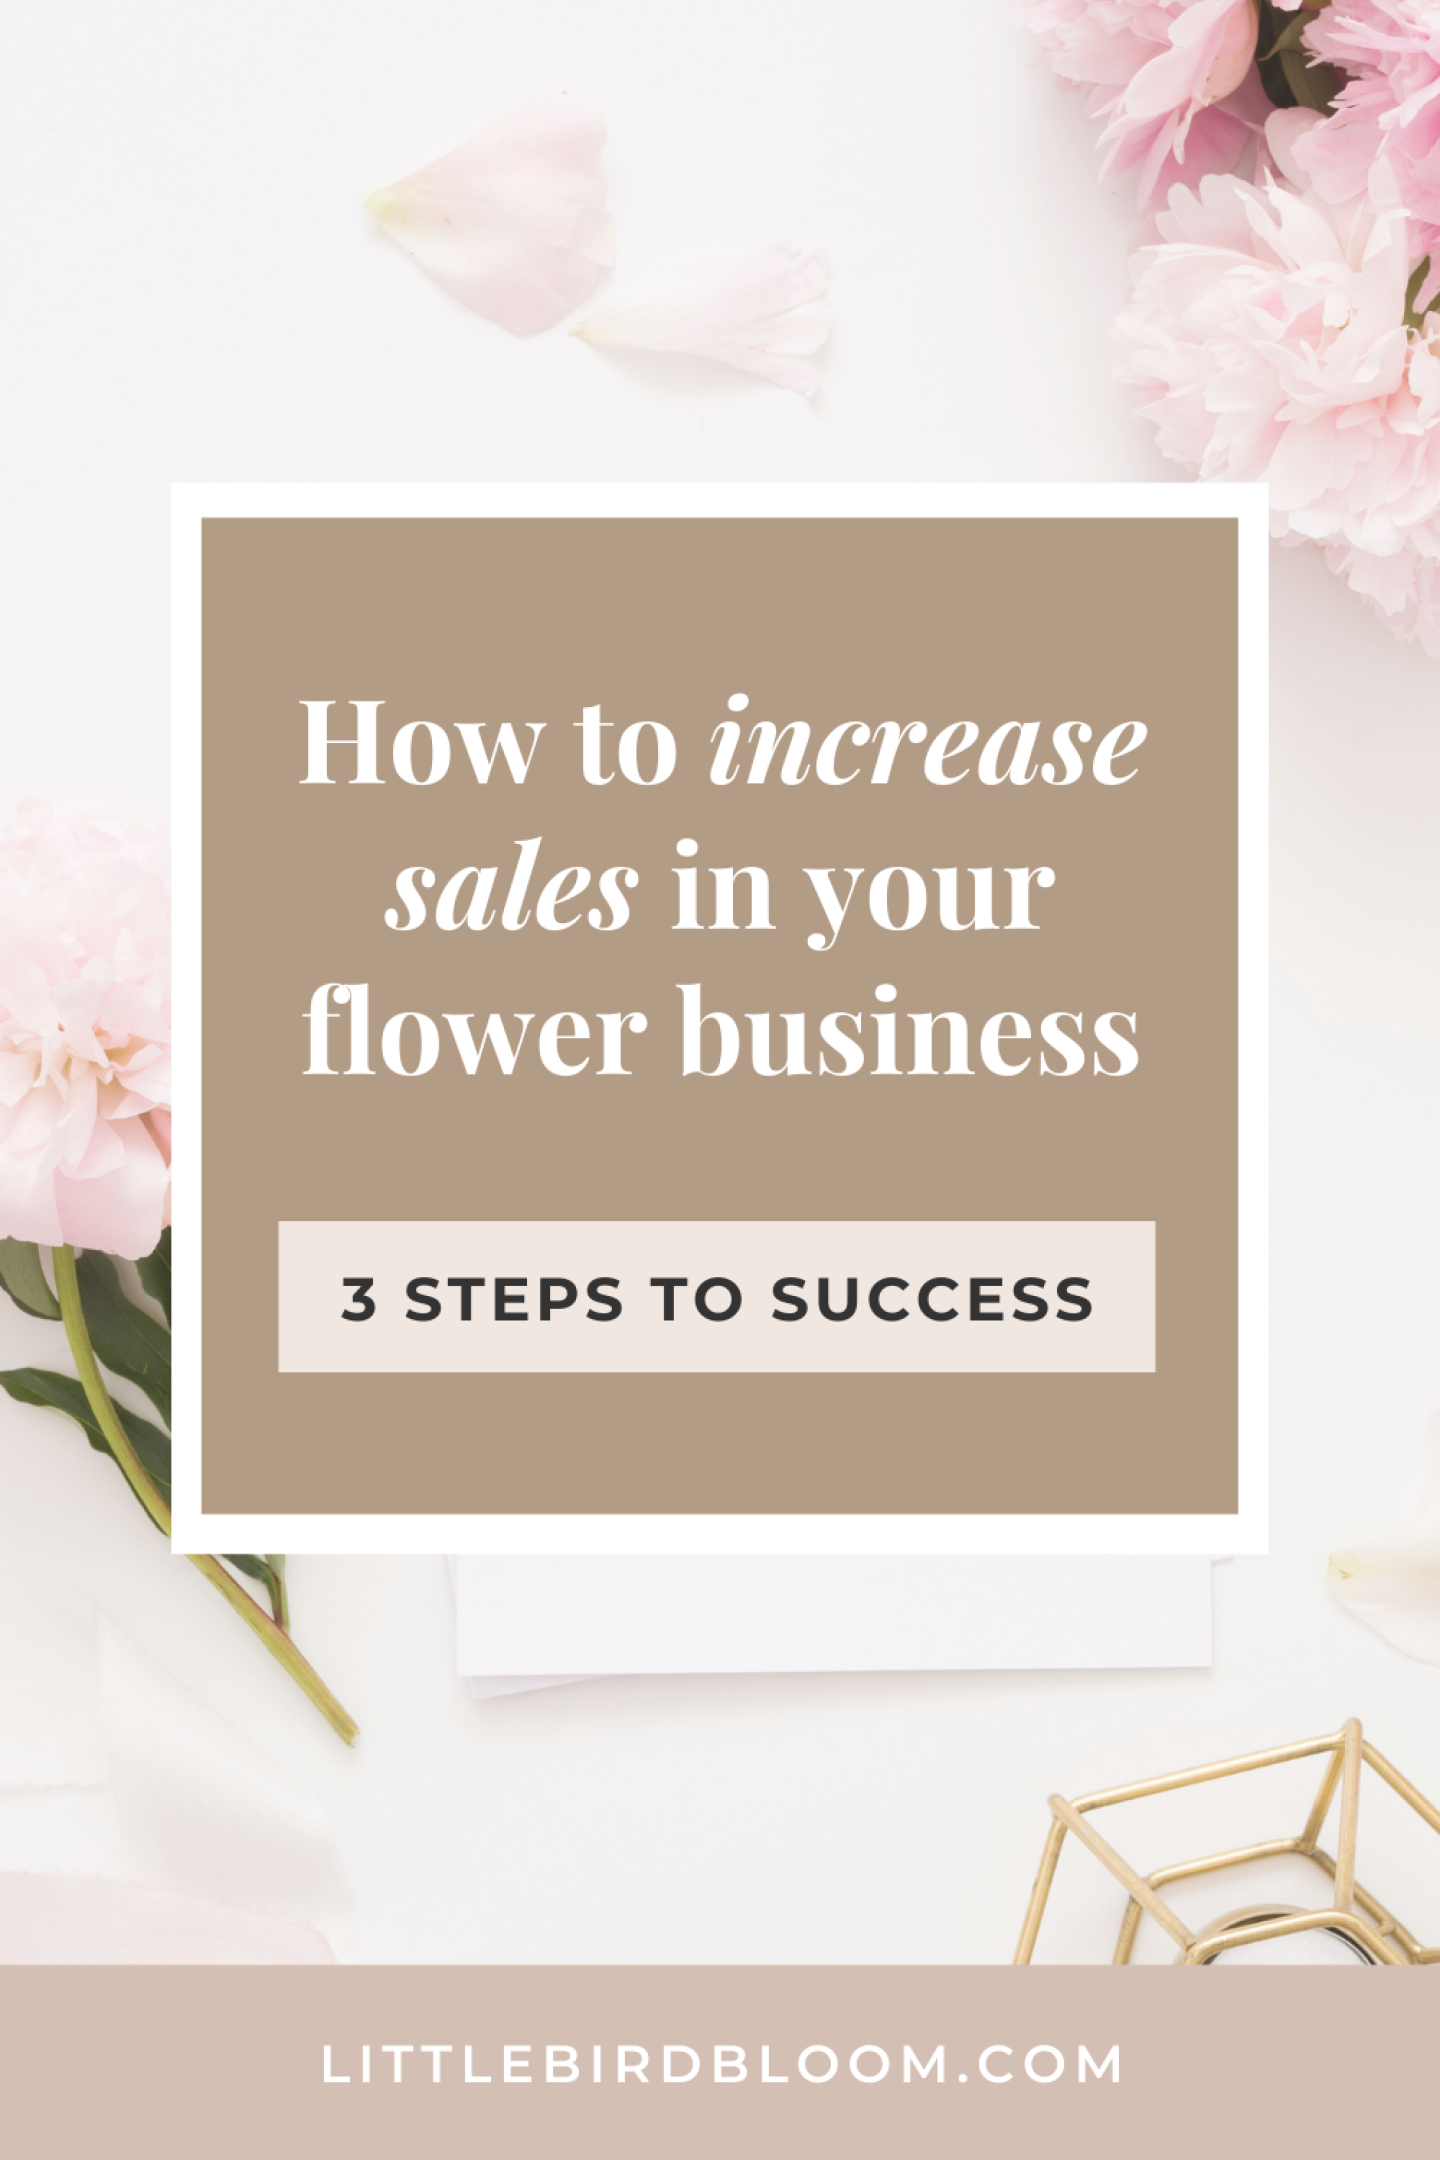 How Can I Increase Sales as a Florist Blog post